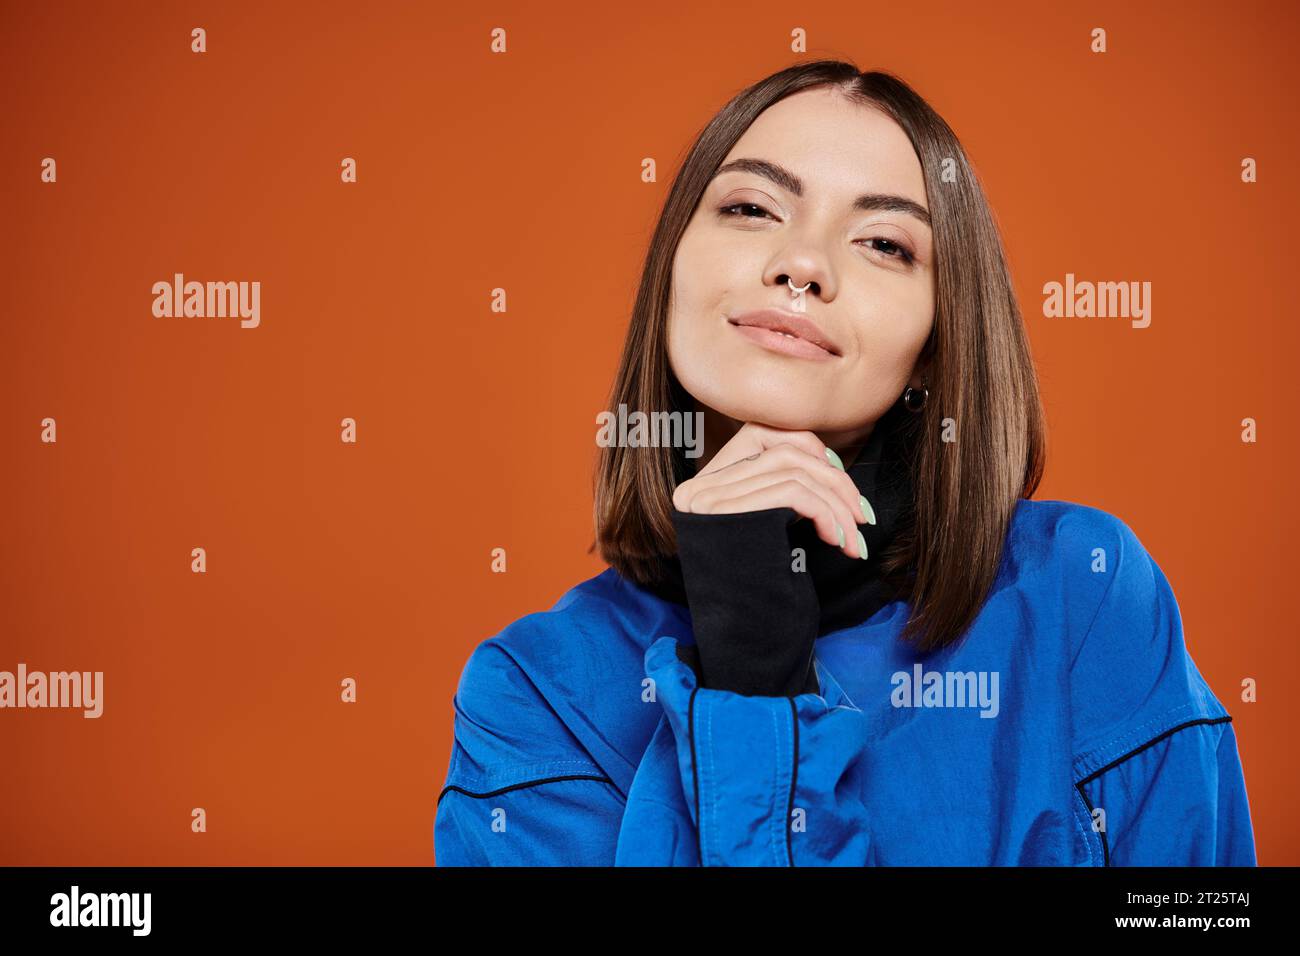 pensive woman with pierced nose looking at camera while thinking on orange backdrop, blue jacket Stock Photo